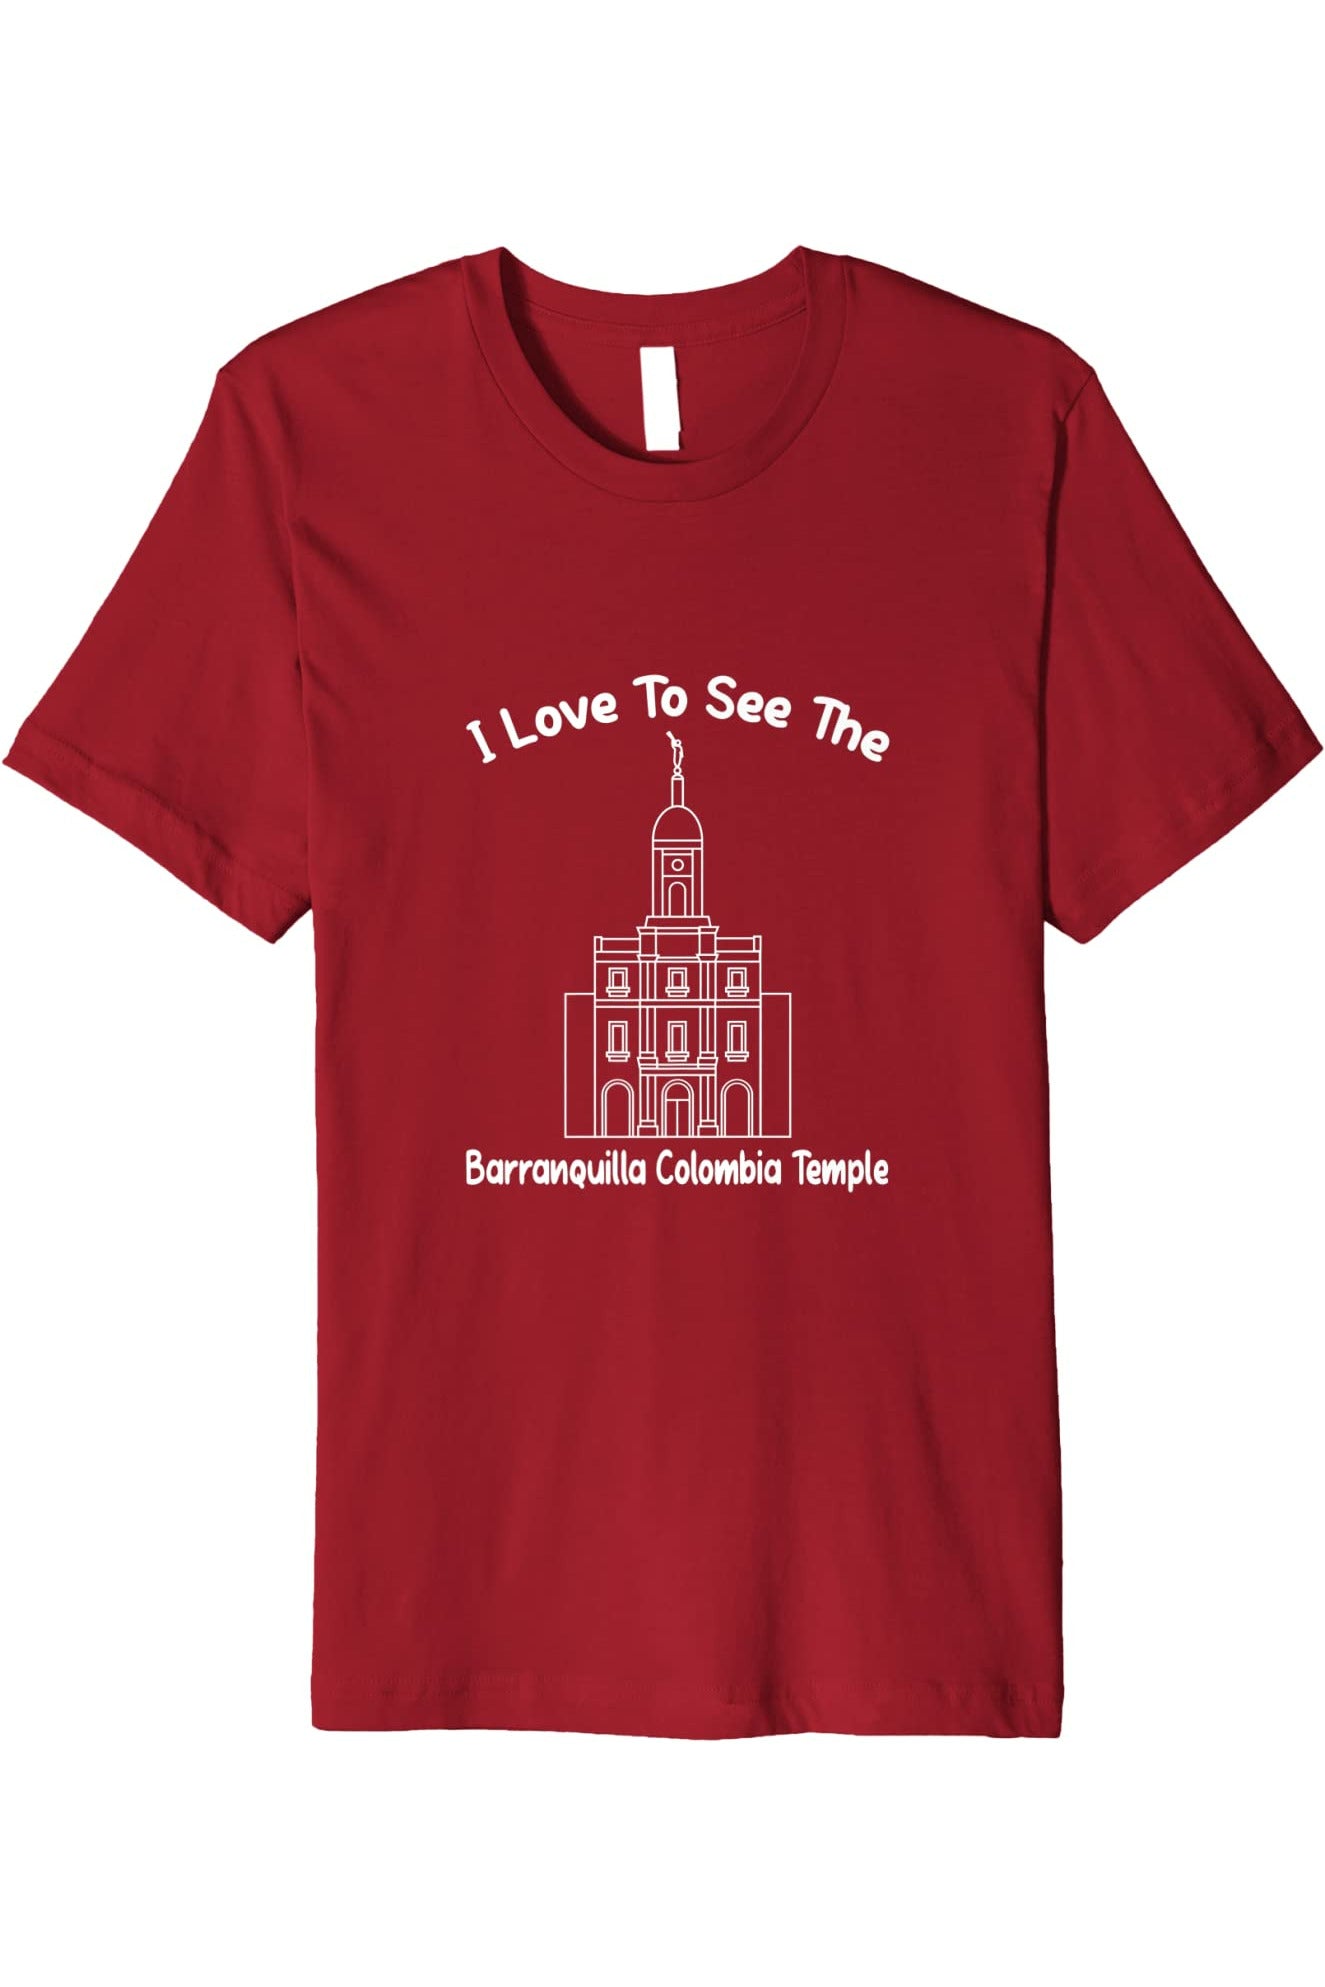 Barranquilla Colombia Temple T-Shirt - Premium - Primary Style (English) US